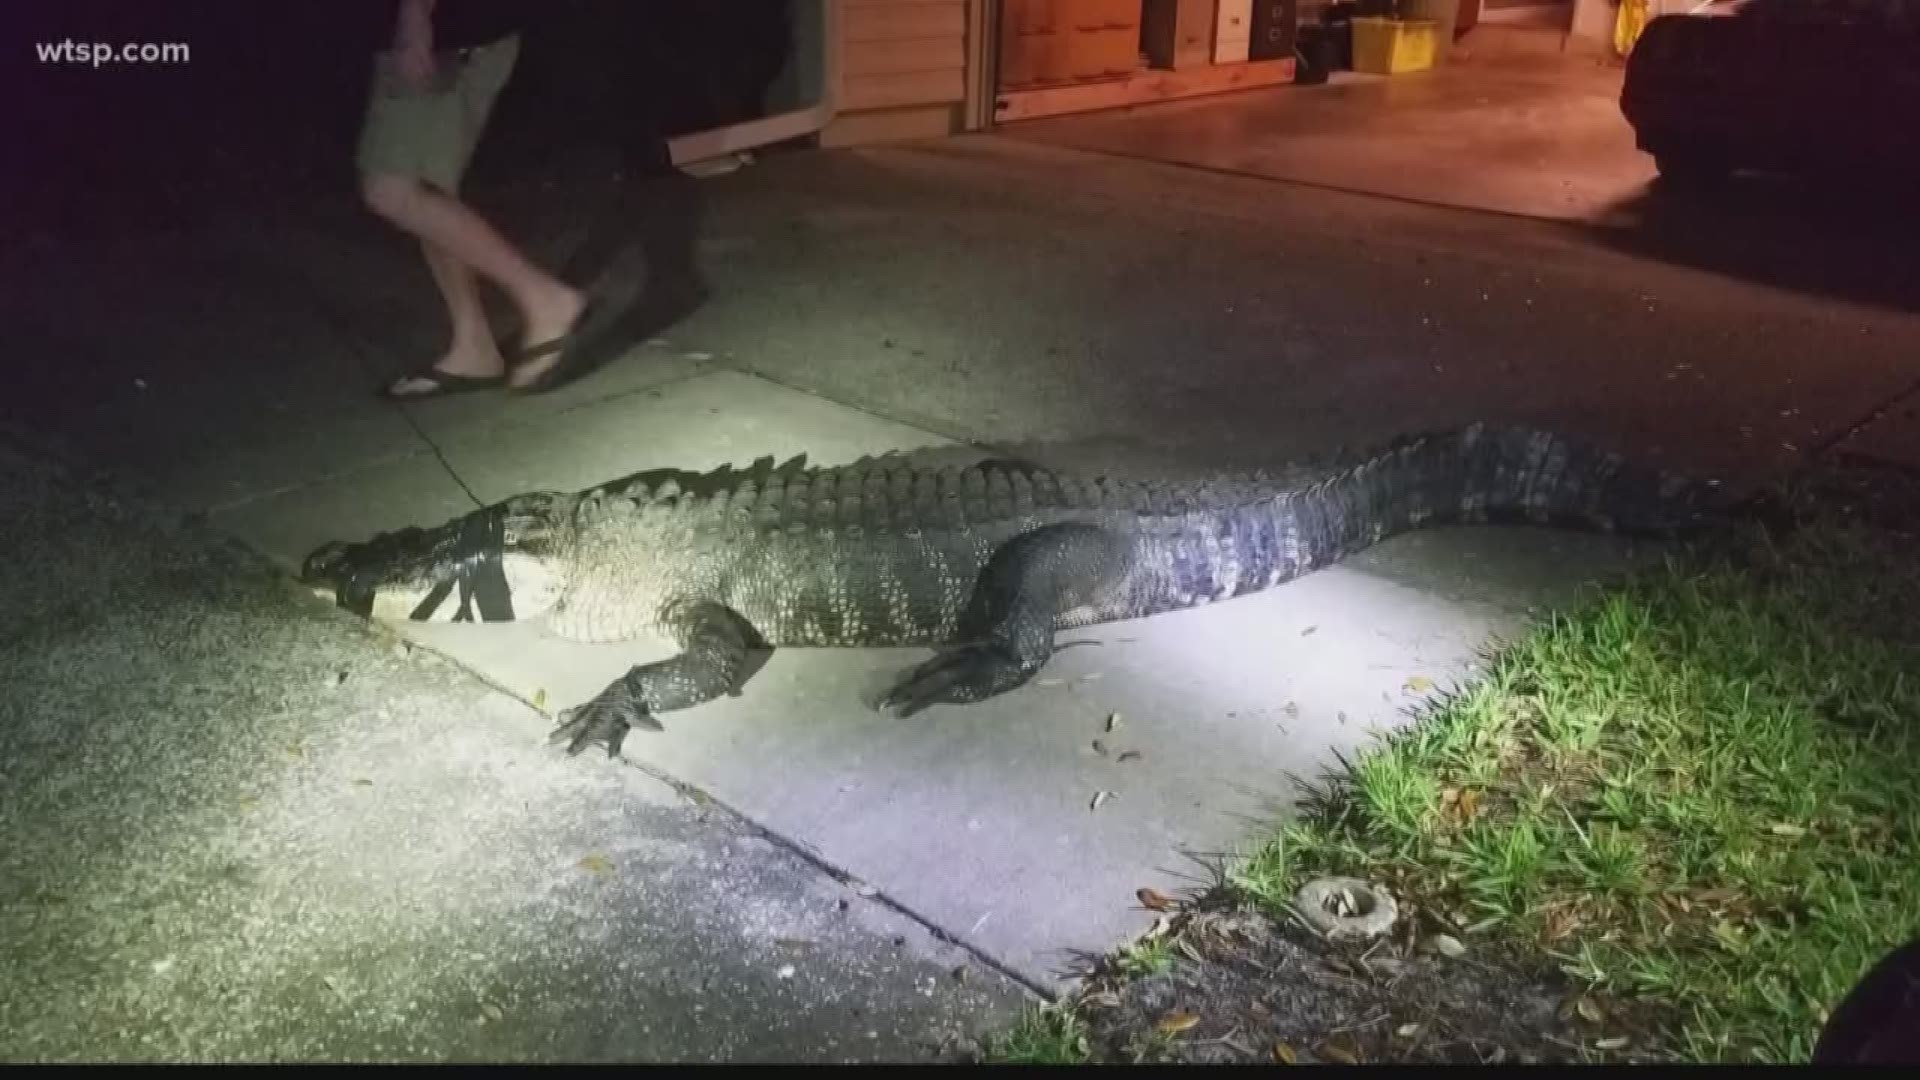 Imagine waking up to an 11-foot gator inside your kitchen.

It's what one Clearwater woman found lurking inside her home around 3:30 Friday morning.

Mary Wischhusen called 911 after hearing a smashing sound and finding the giant gator in her kitchen.